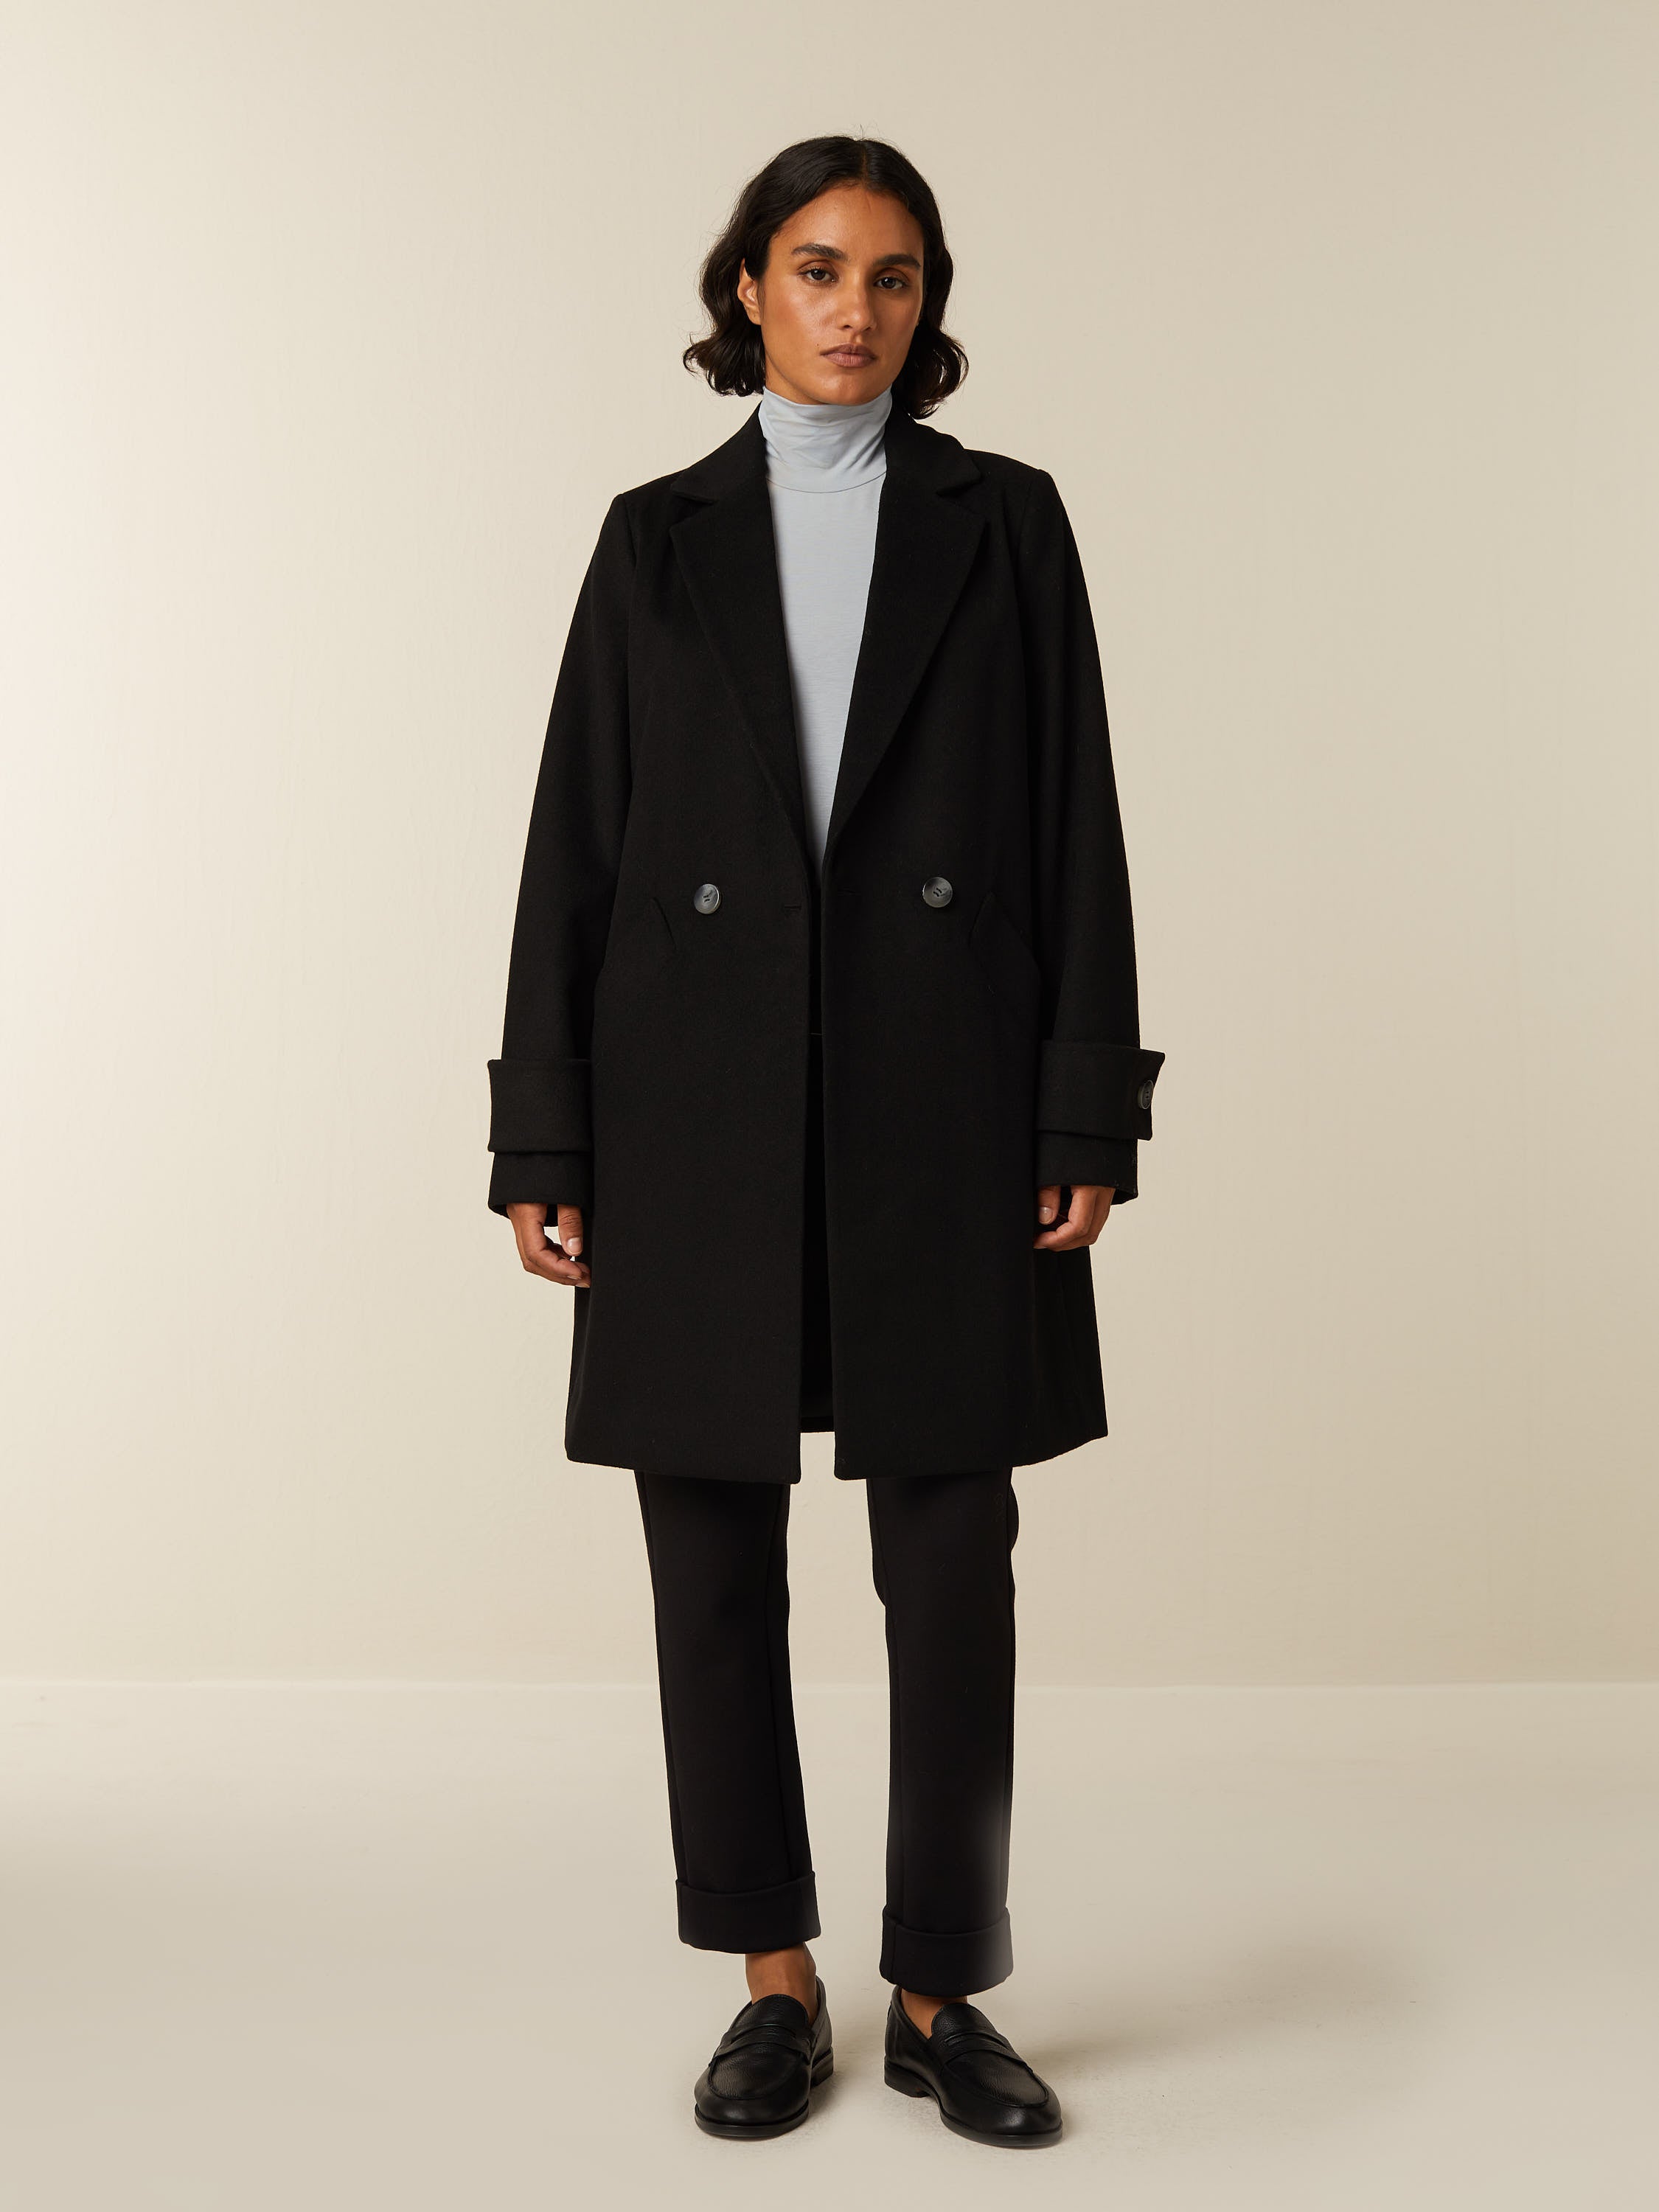 Outerwear - Beaumont Amsterdam – Page 2